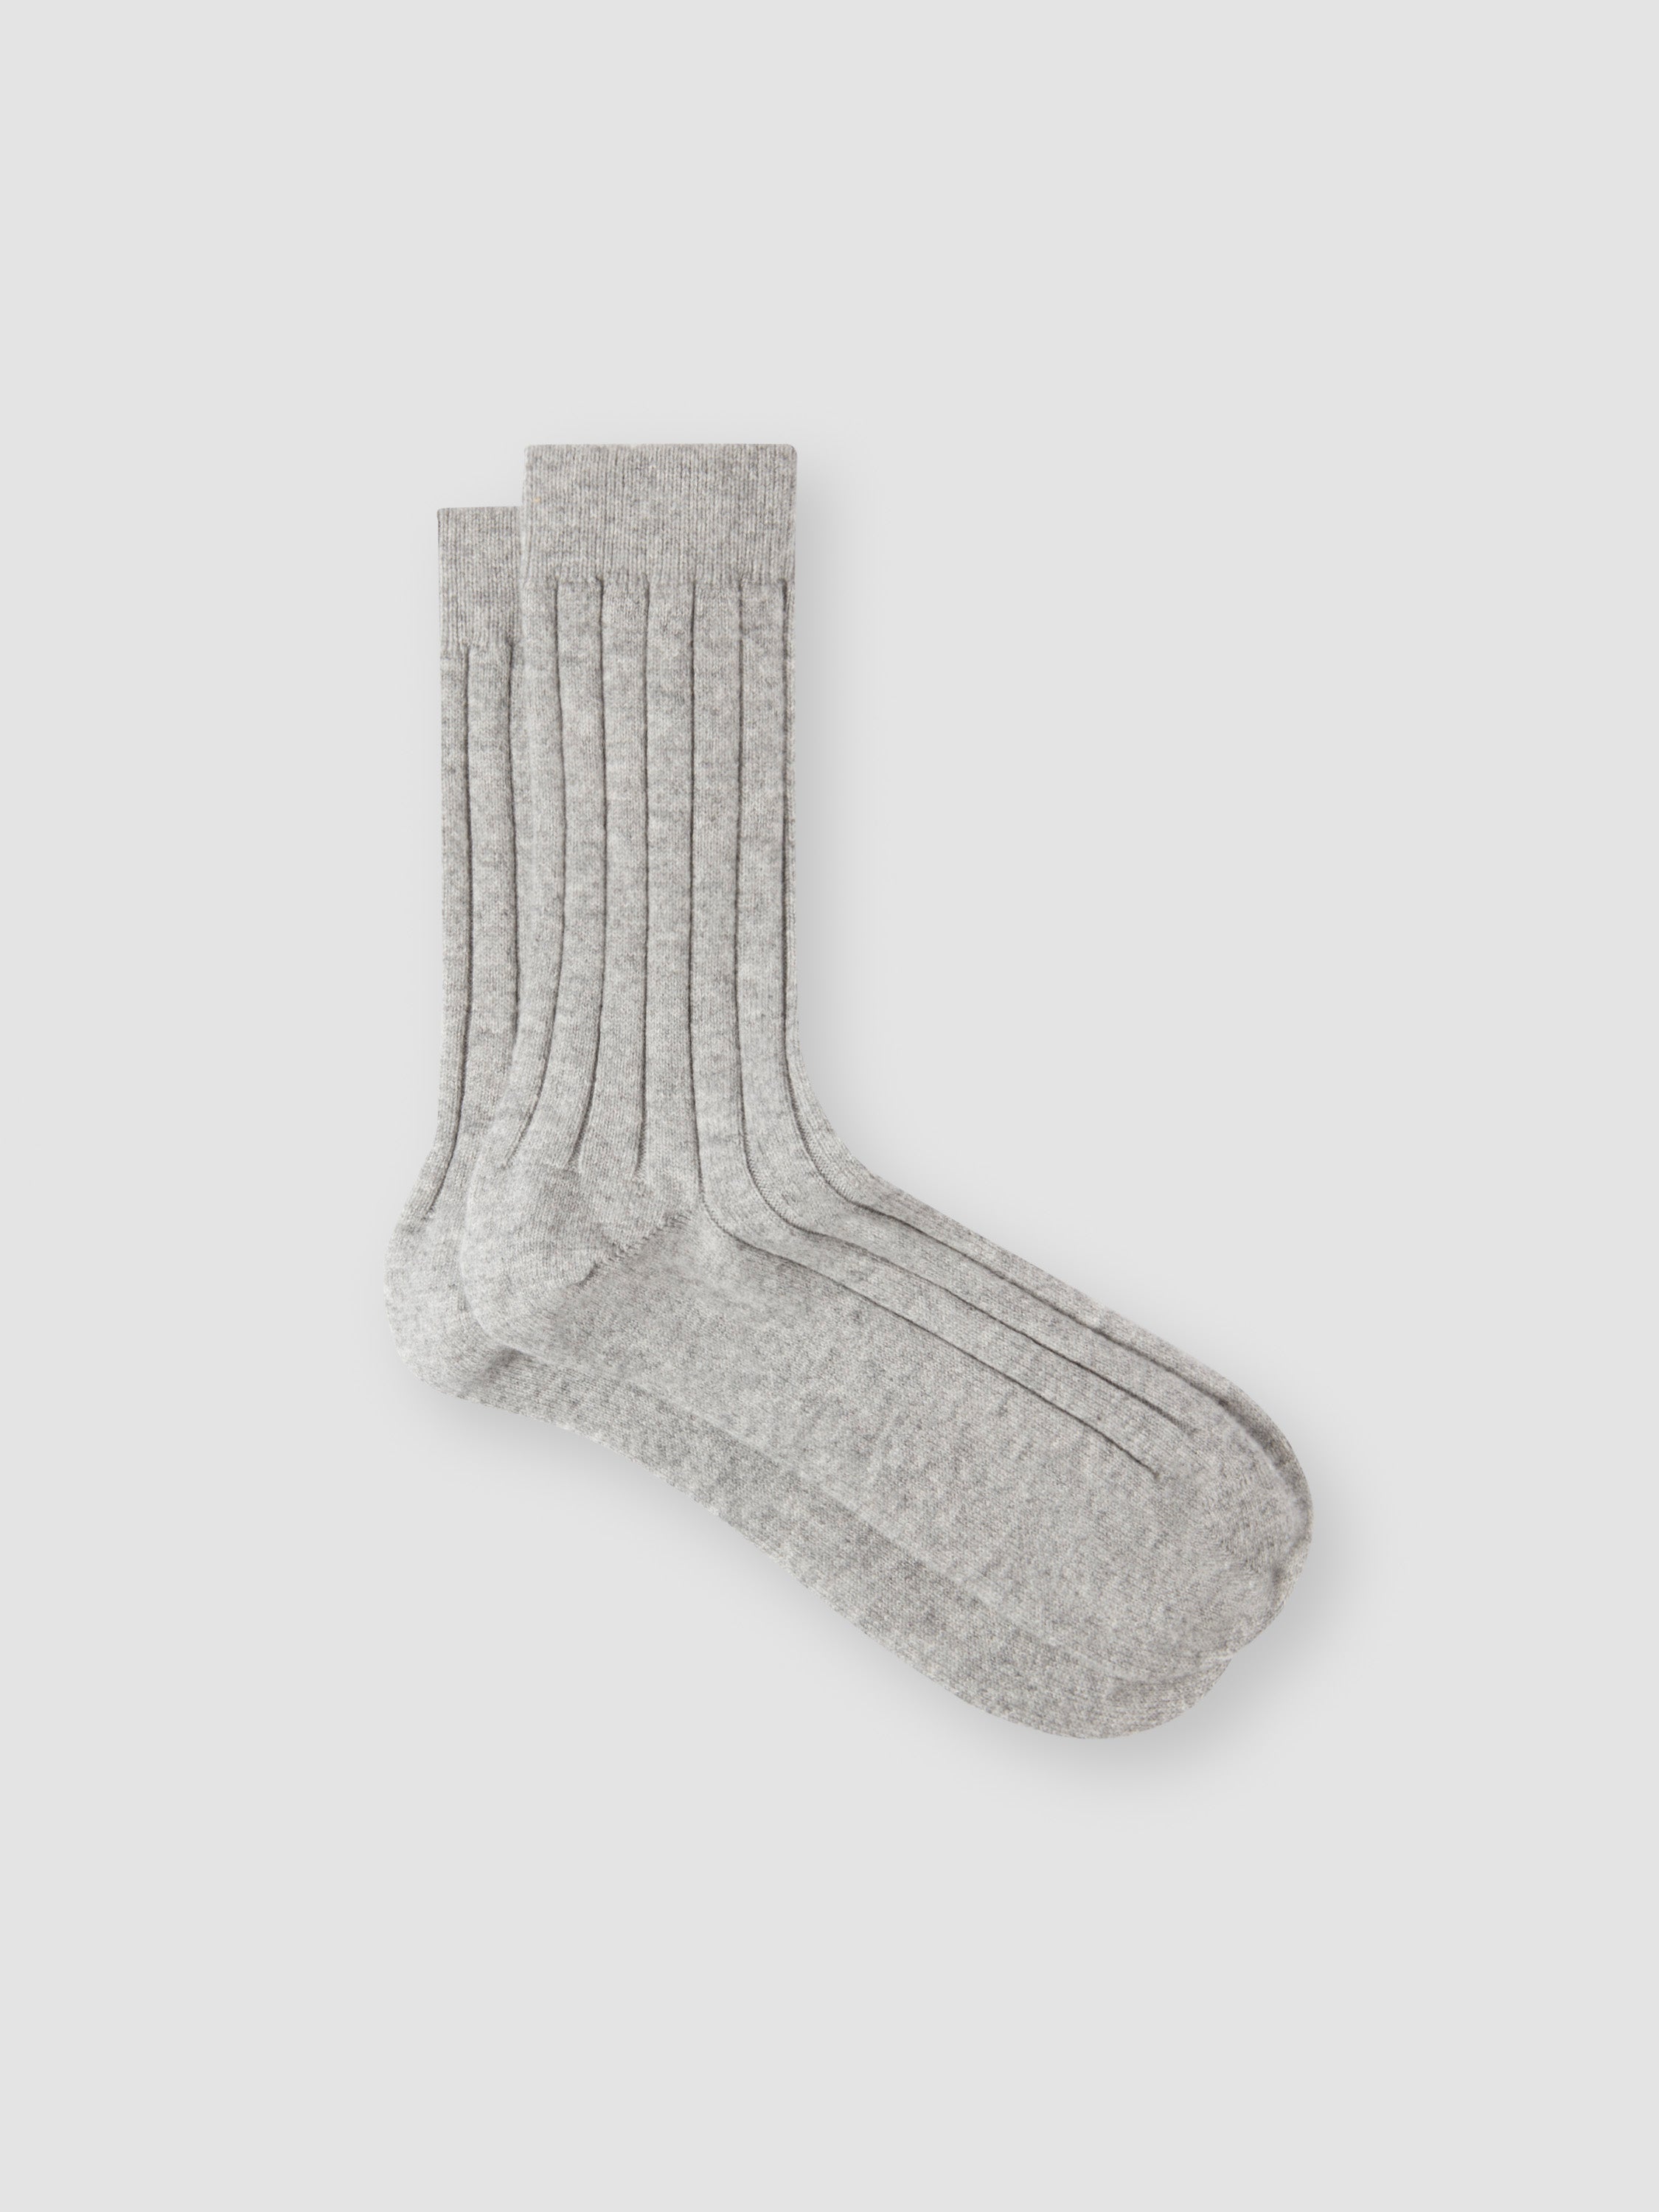 Cashmere Knitted Socks Grey Product Image 